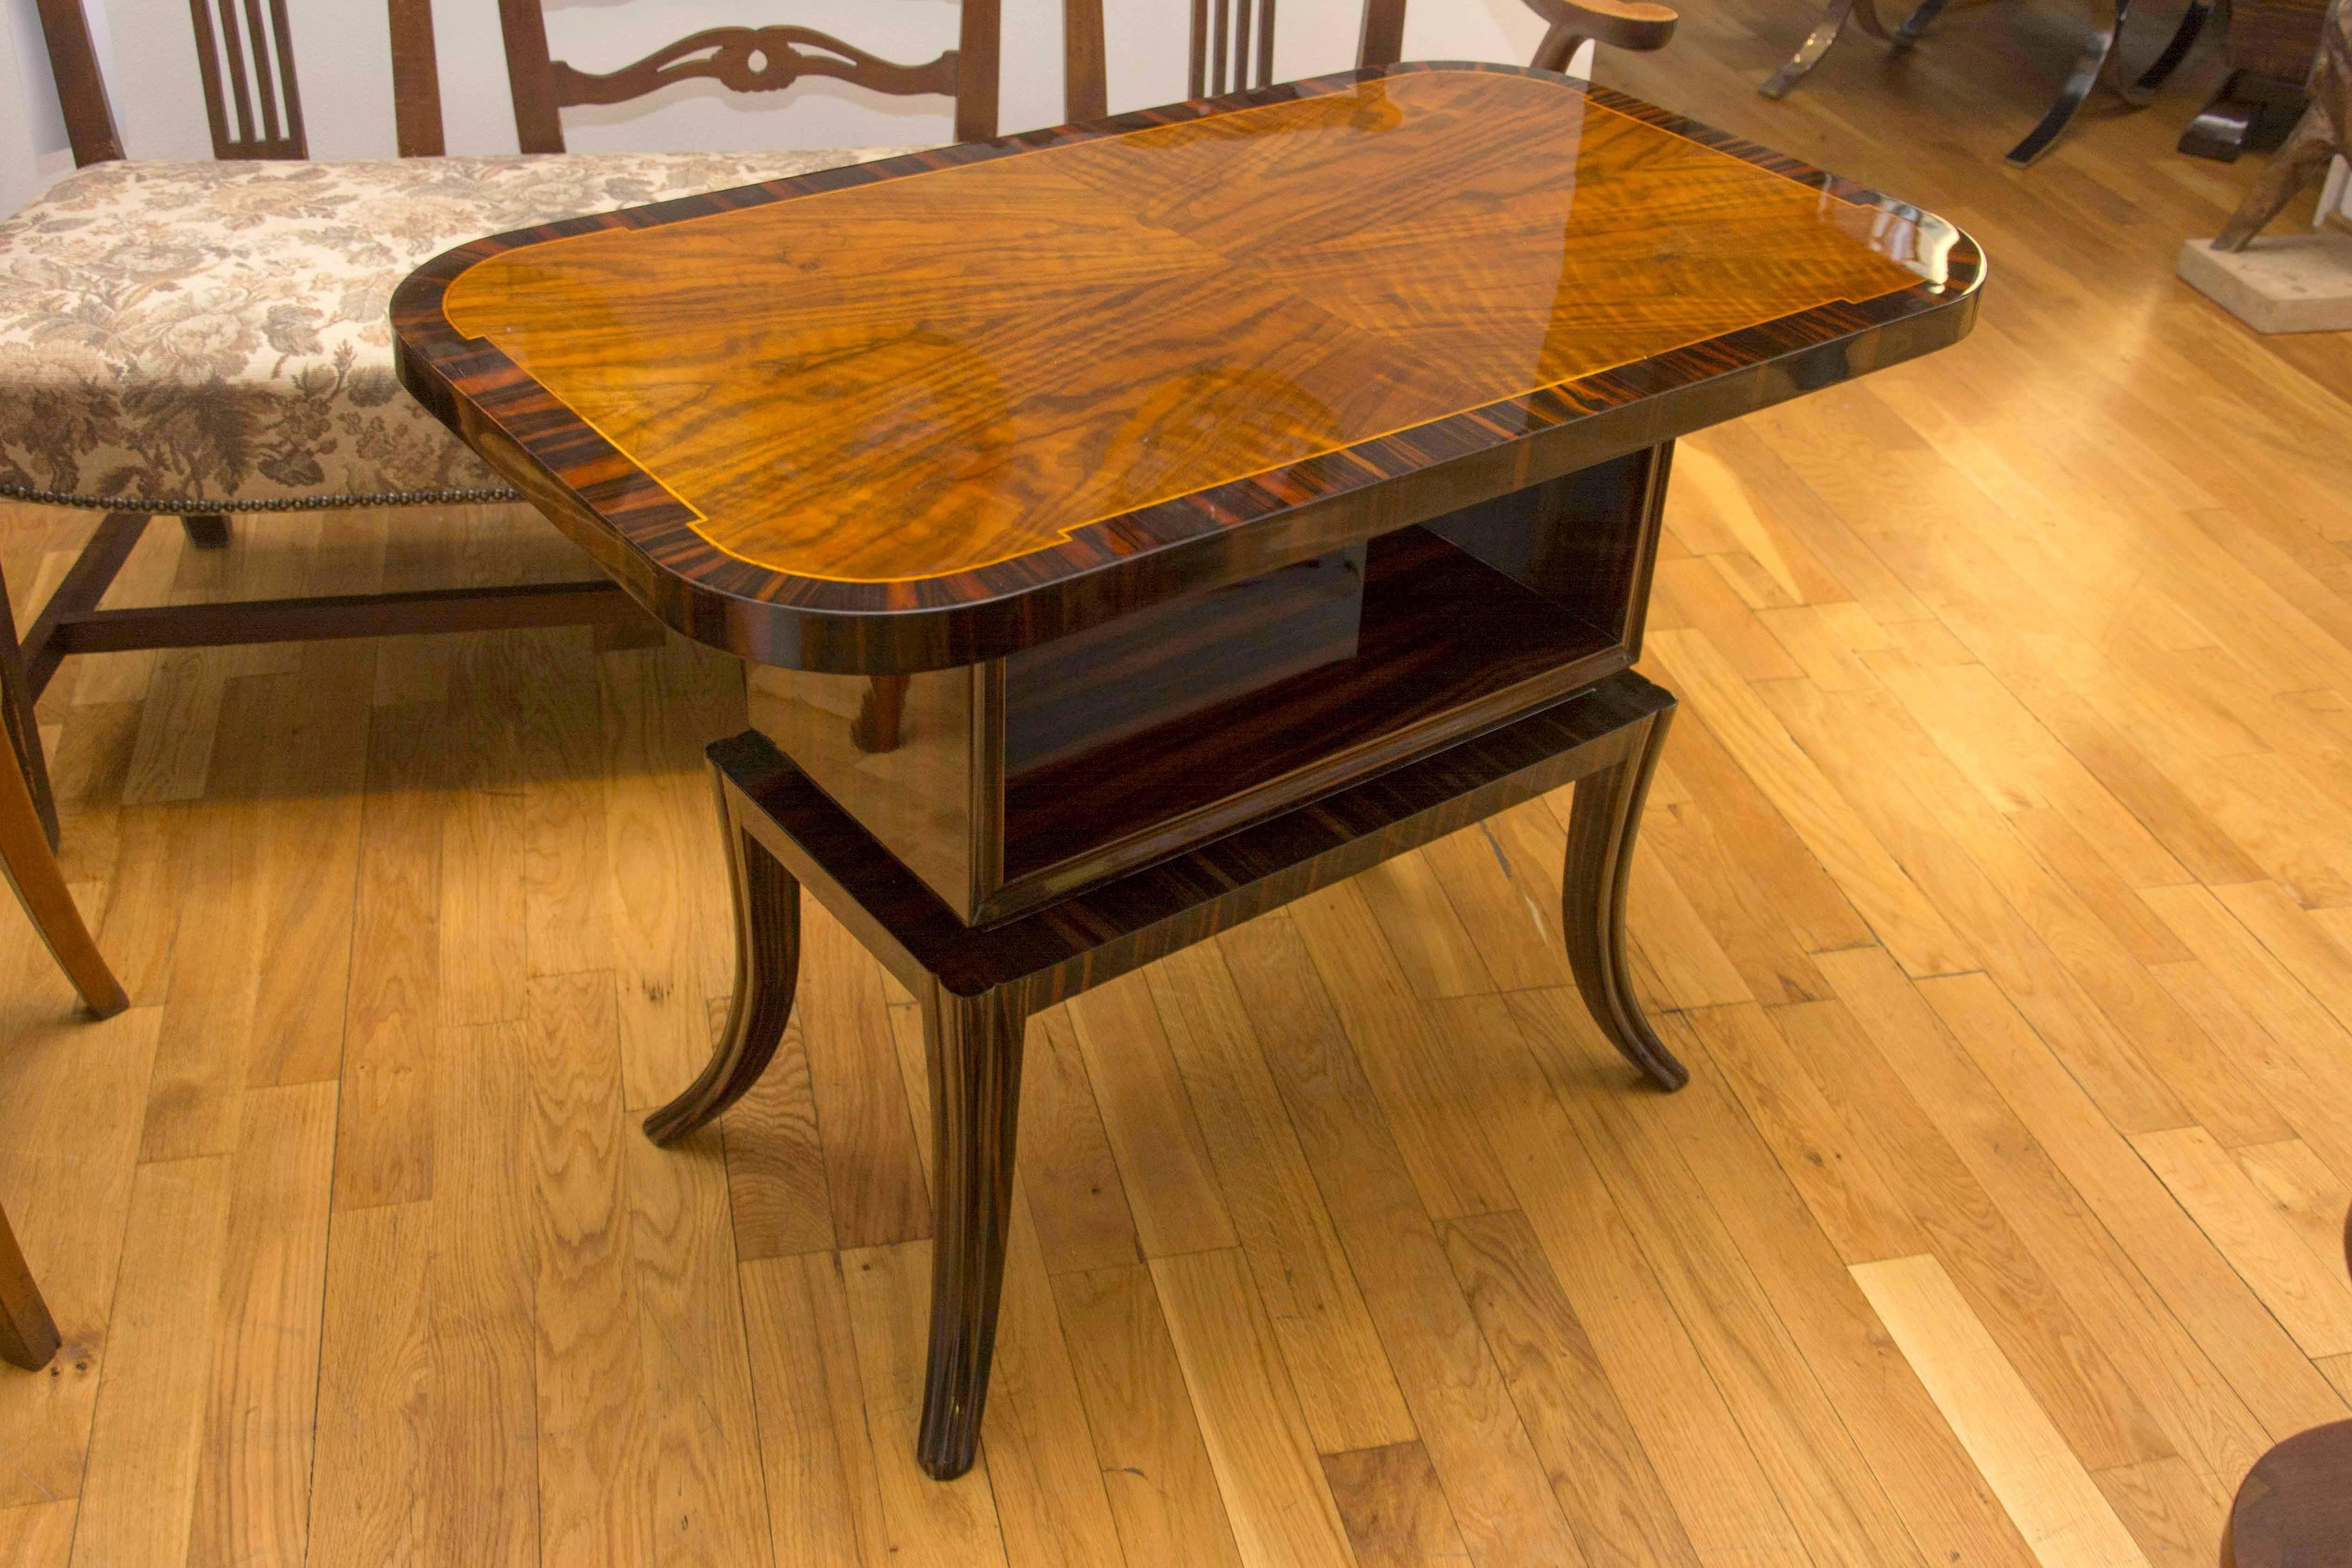 Art Deco Macassar and walnut veneer occasional coffee table, made in the 1930s in Central Europe. It features a storage space for magazines, documents etc. Very elegant design. It has been fully restored and features a high-gloss finish.